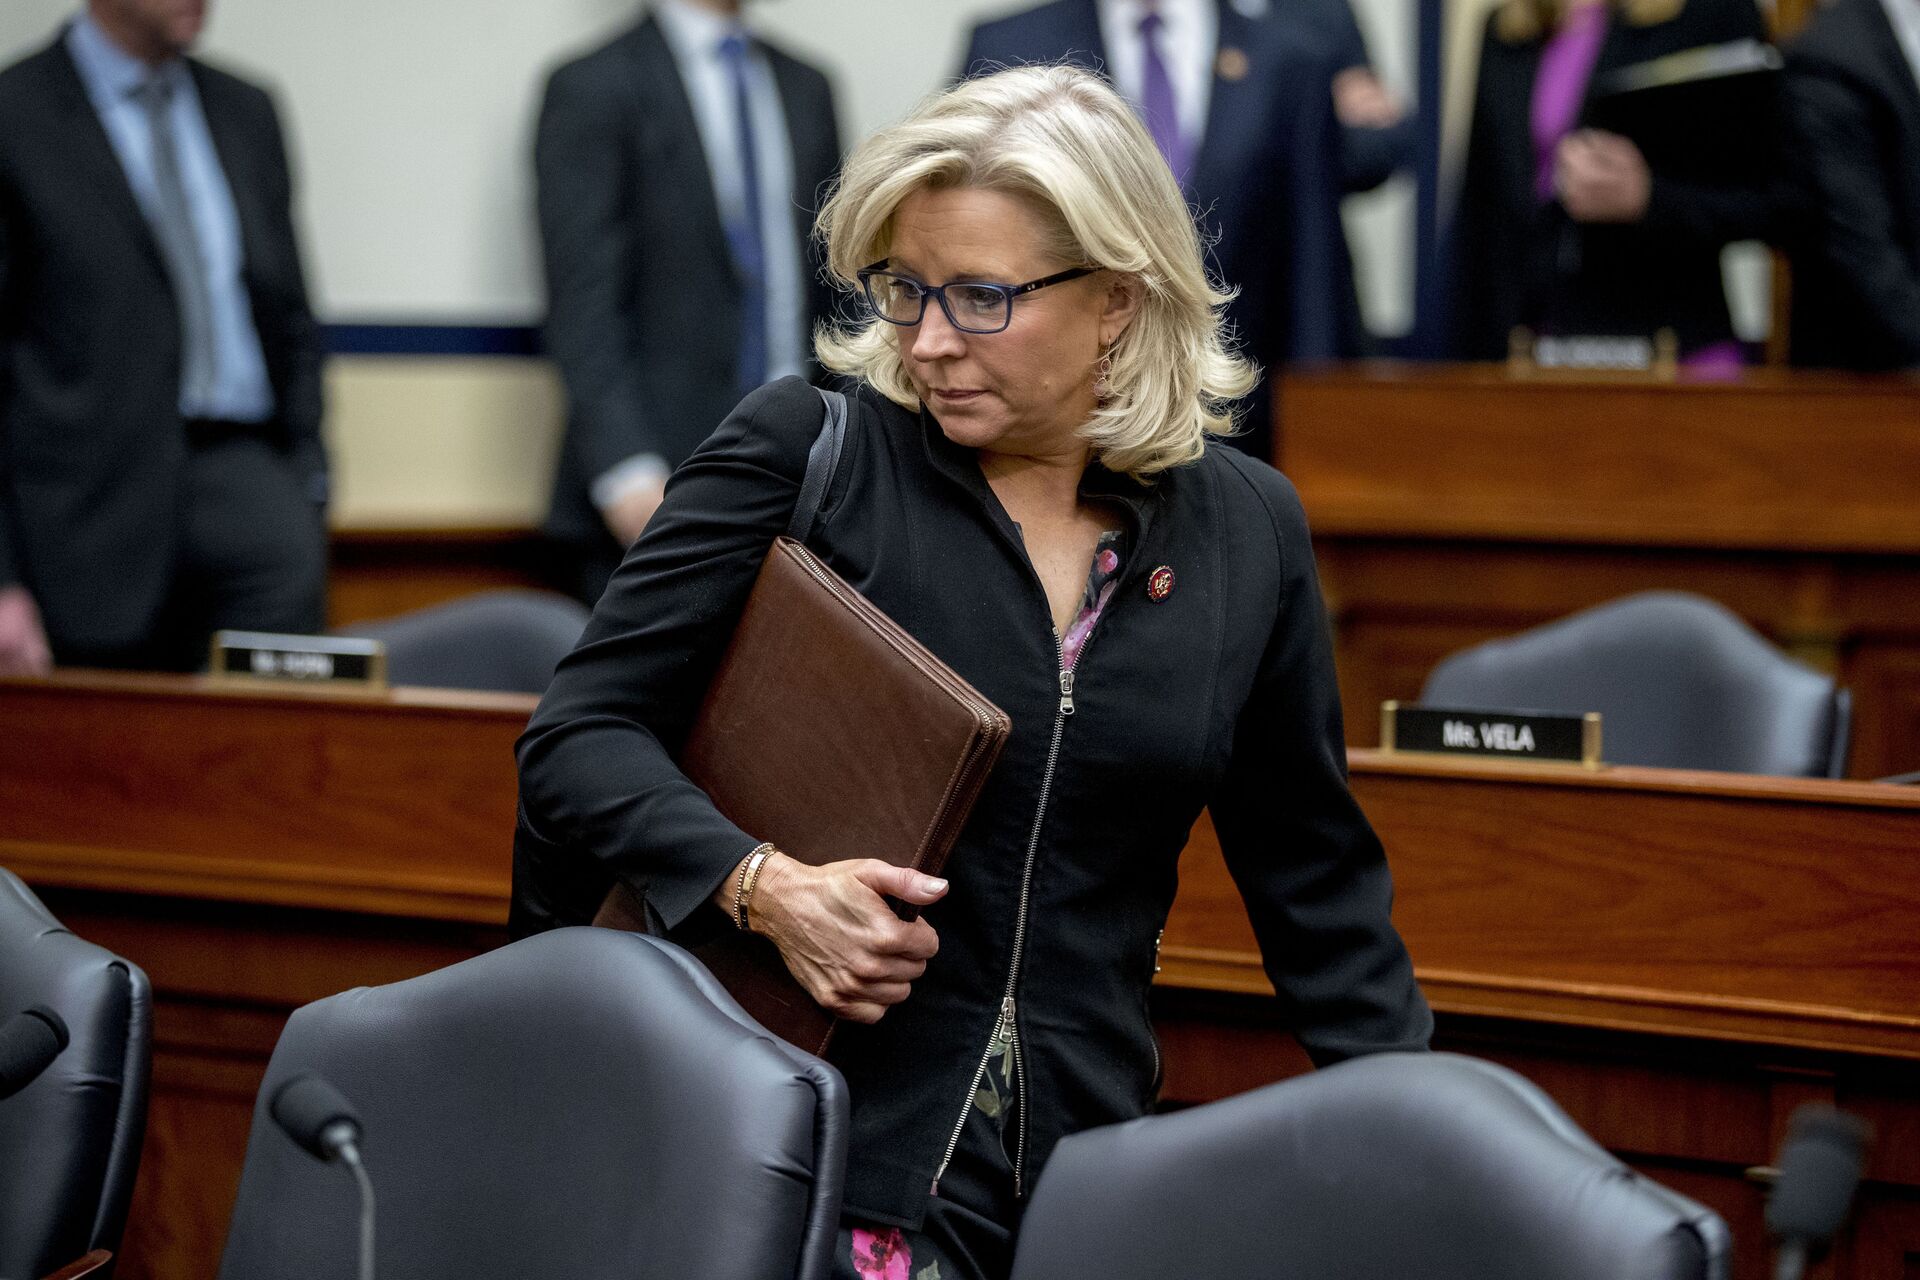 FILE - In this Tuesday, April 2, 2019 file photo Rep. Liz Cheney, R-Wyo., arrives for a House Armed Services Committee budget hearing on Capitol Hill in Washington - Sputnik International, 1920, 09.09.2021